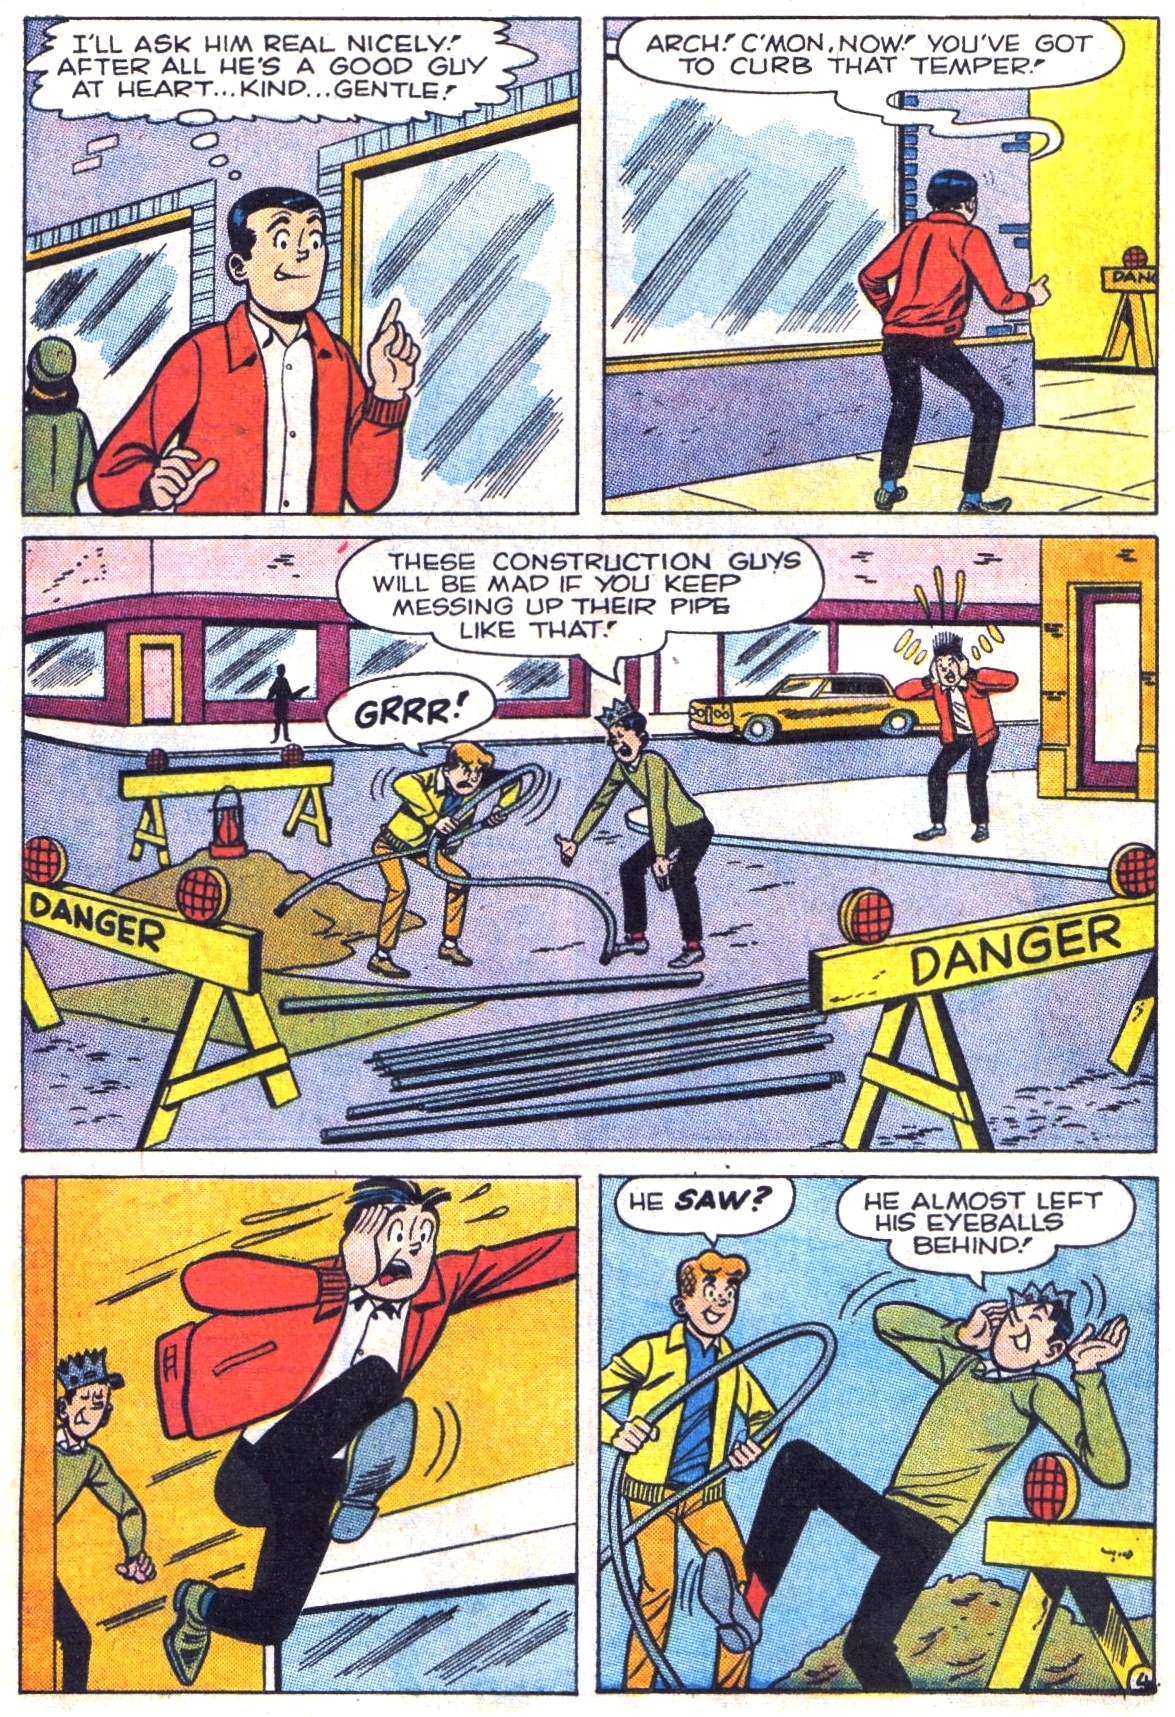 Archie (1960) 162 Page 16